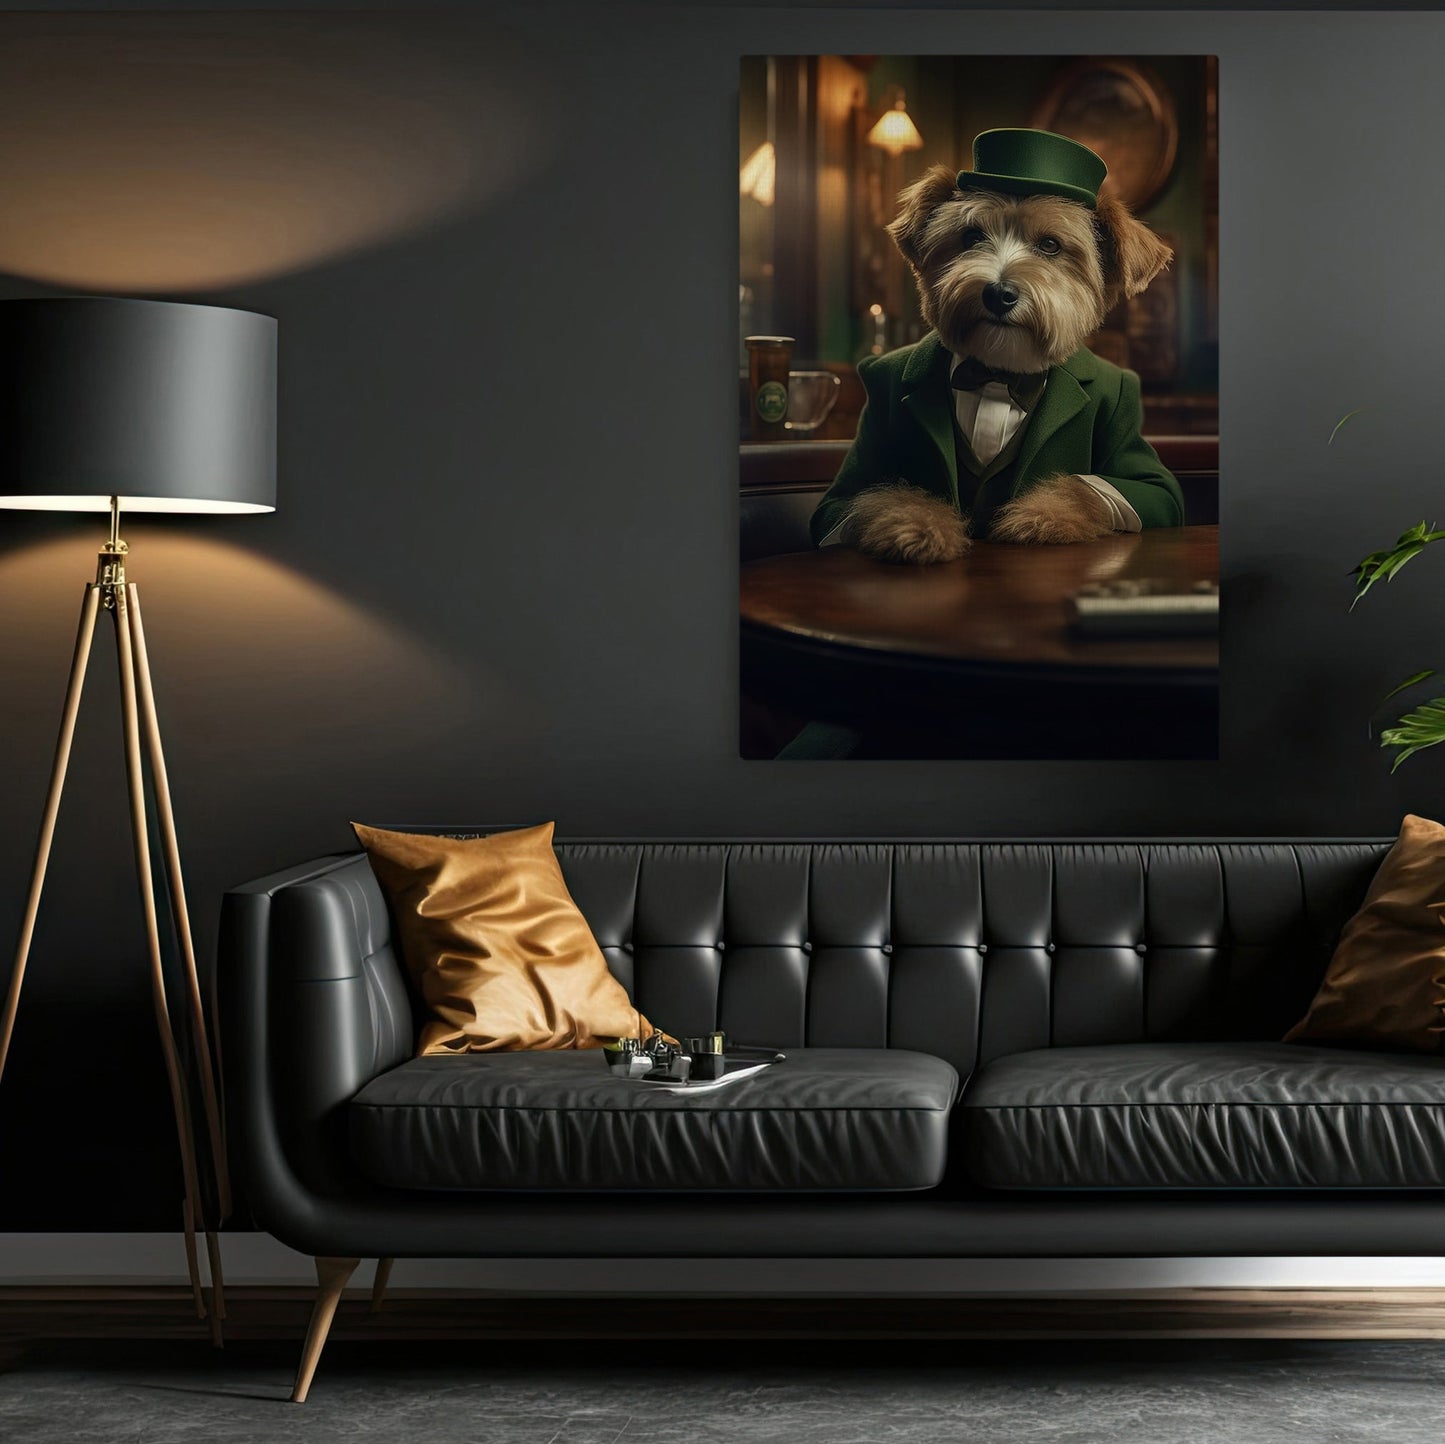 Gentlemen Yorkshire Terrier, Victorian Dog Canvas Painting, Victorian Animal Wall Art Decor, Poster Gift For Yorkshire Terrier Dog Lovers